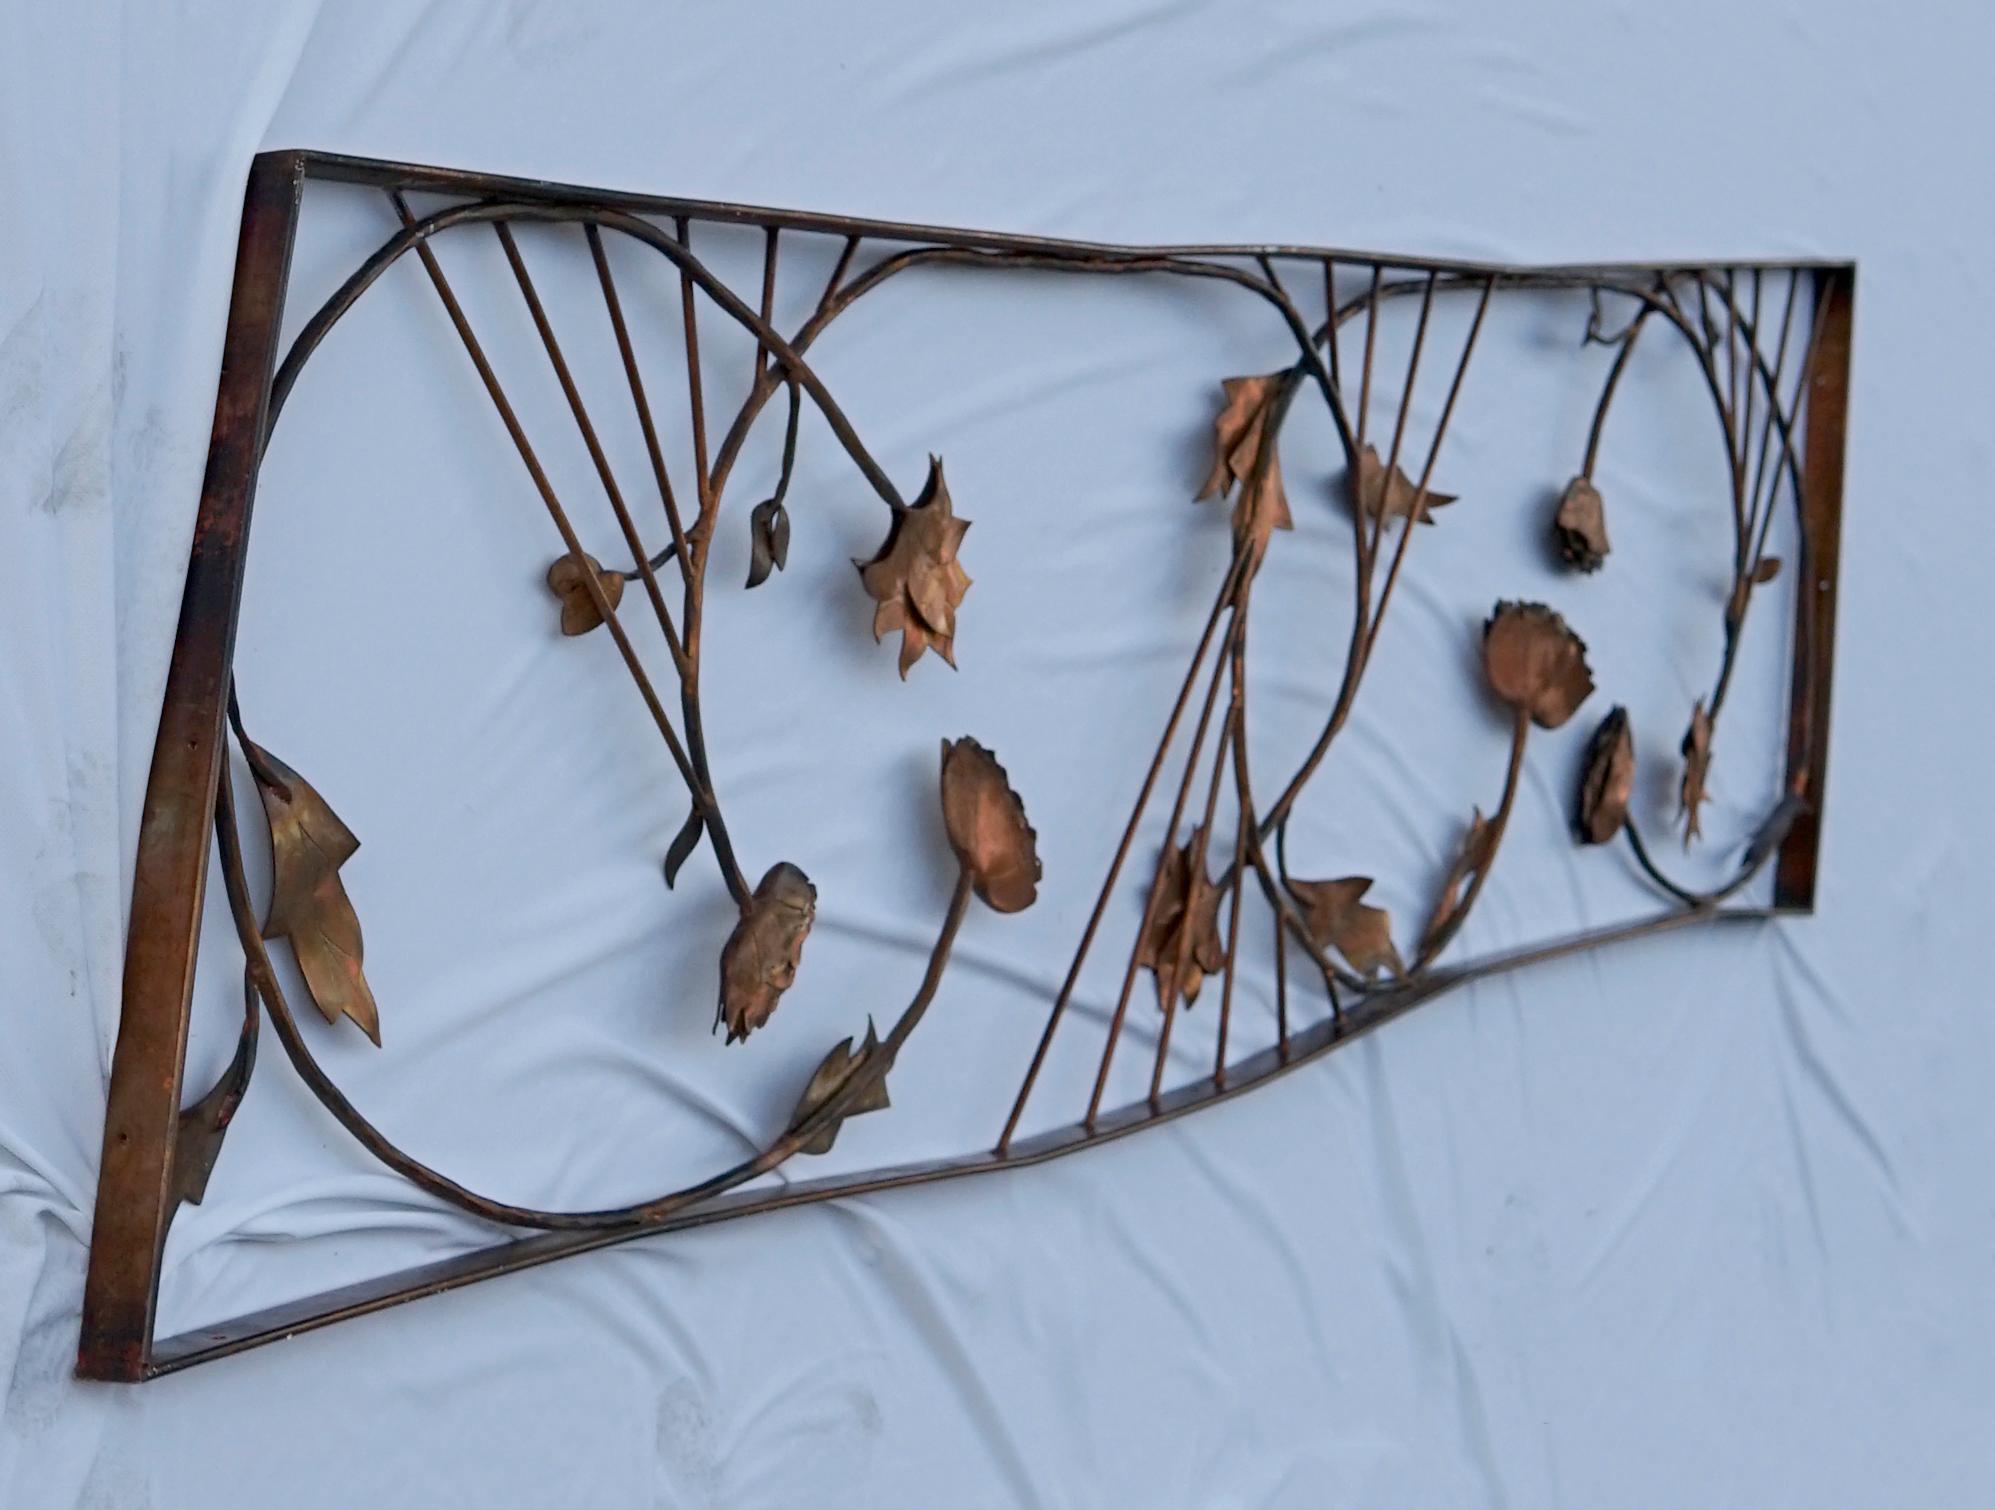 The gloves are off--the reserve has been removed on this one-of-a kind copper art piece.
Framed Copper hand-forged rectangular wall art can be mounted on a wall or suspended from the pre-drilled openings at the top of the copper frame. This is rare,